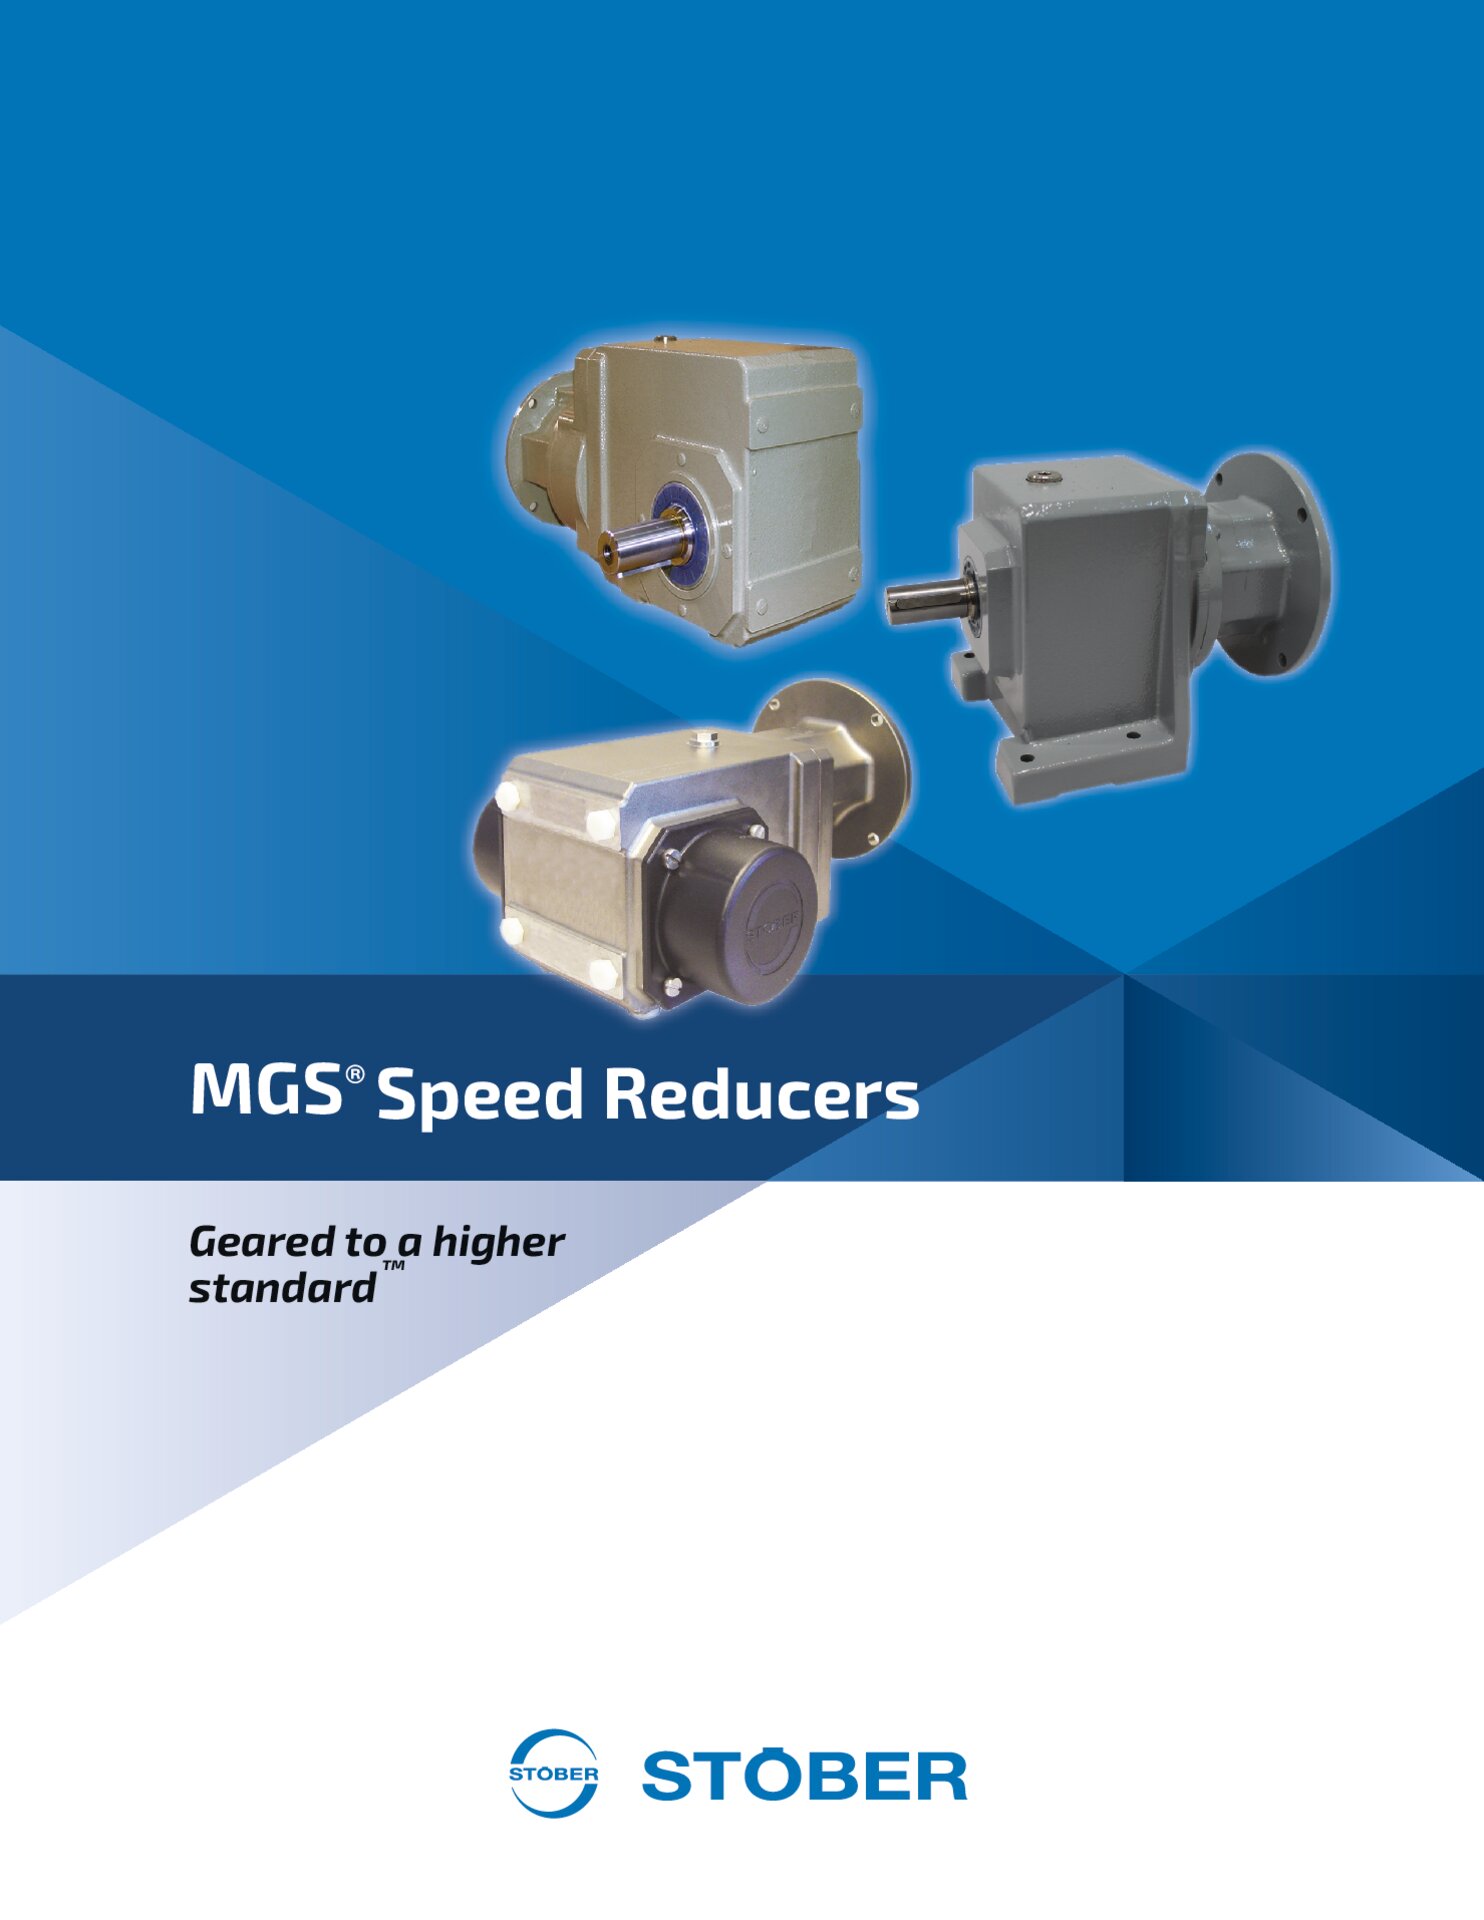 MGS Speed Reducers